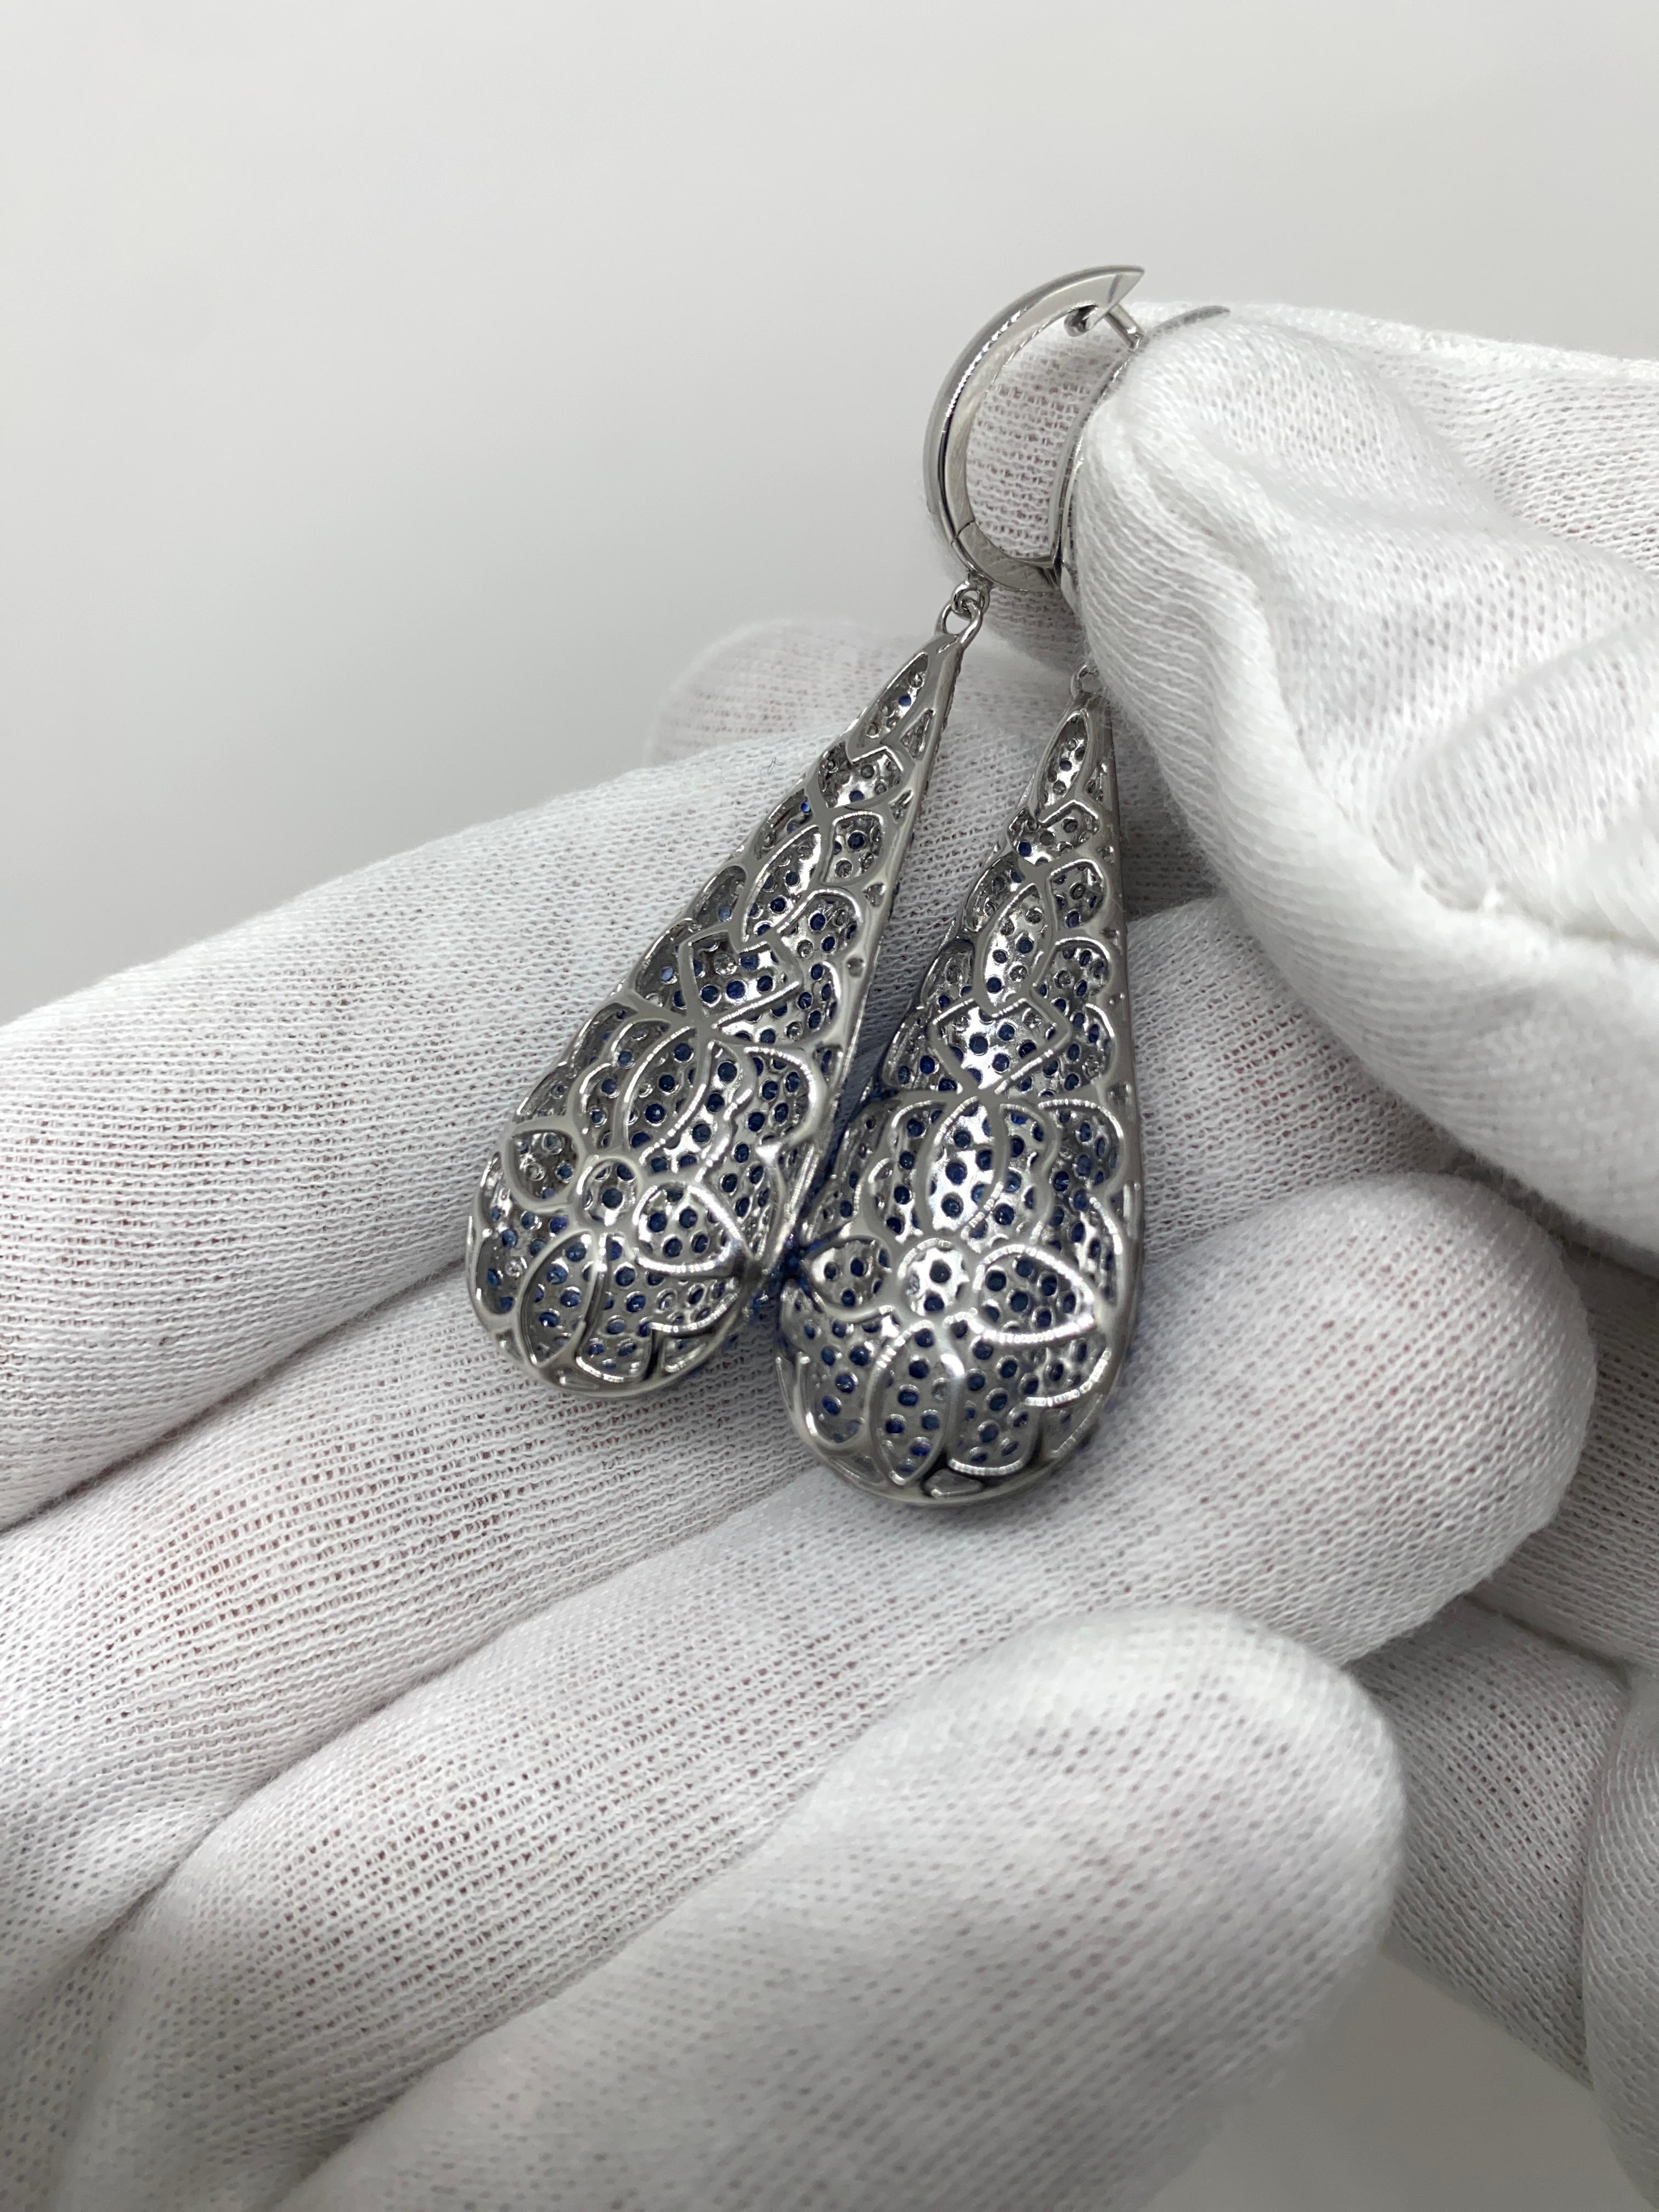 18kt White Gold Stunning Drop Earrings 5.62 Ct Blue Sapphires & 1.42 Diamonds For Sale 2